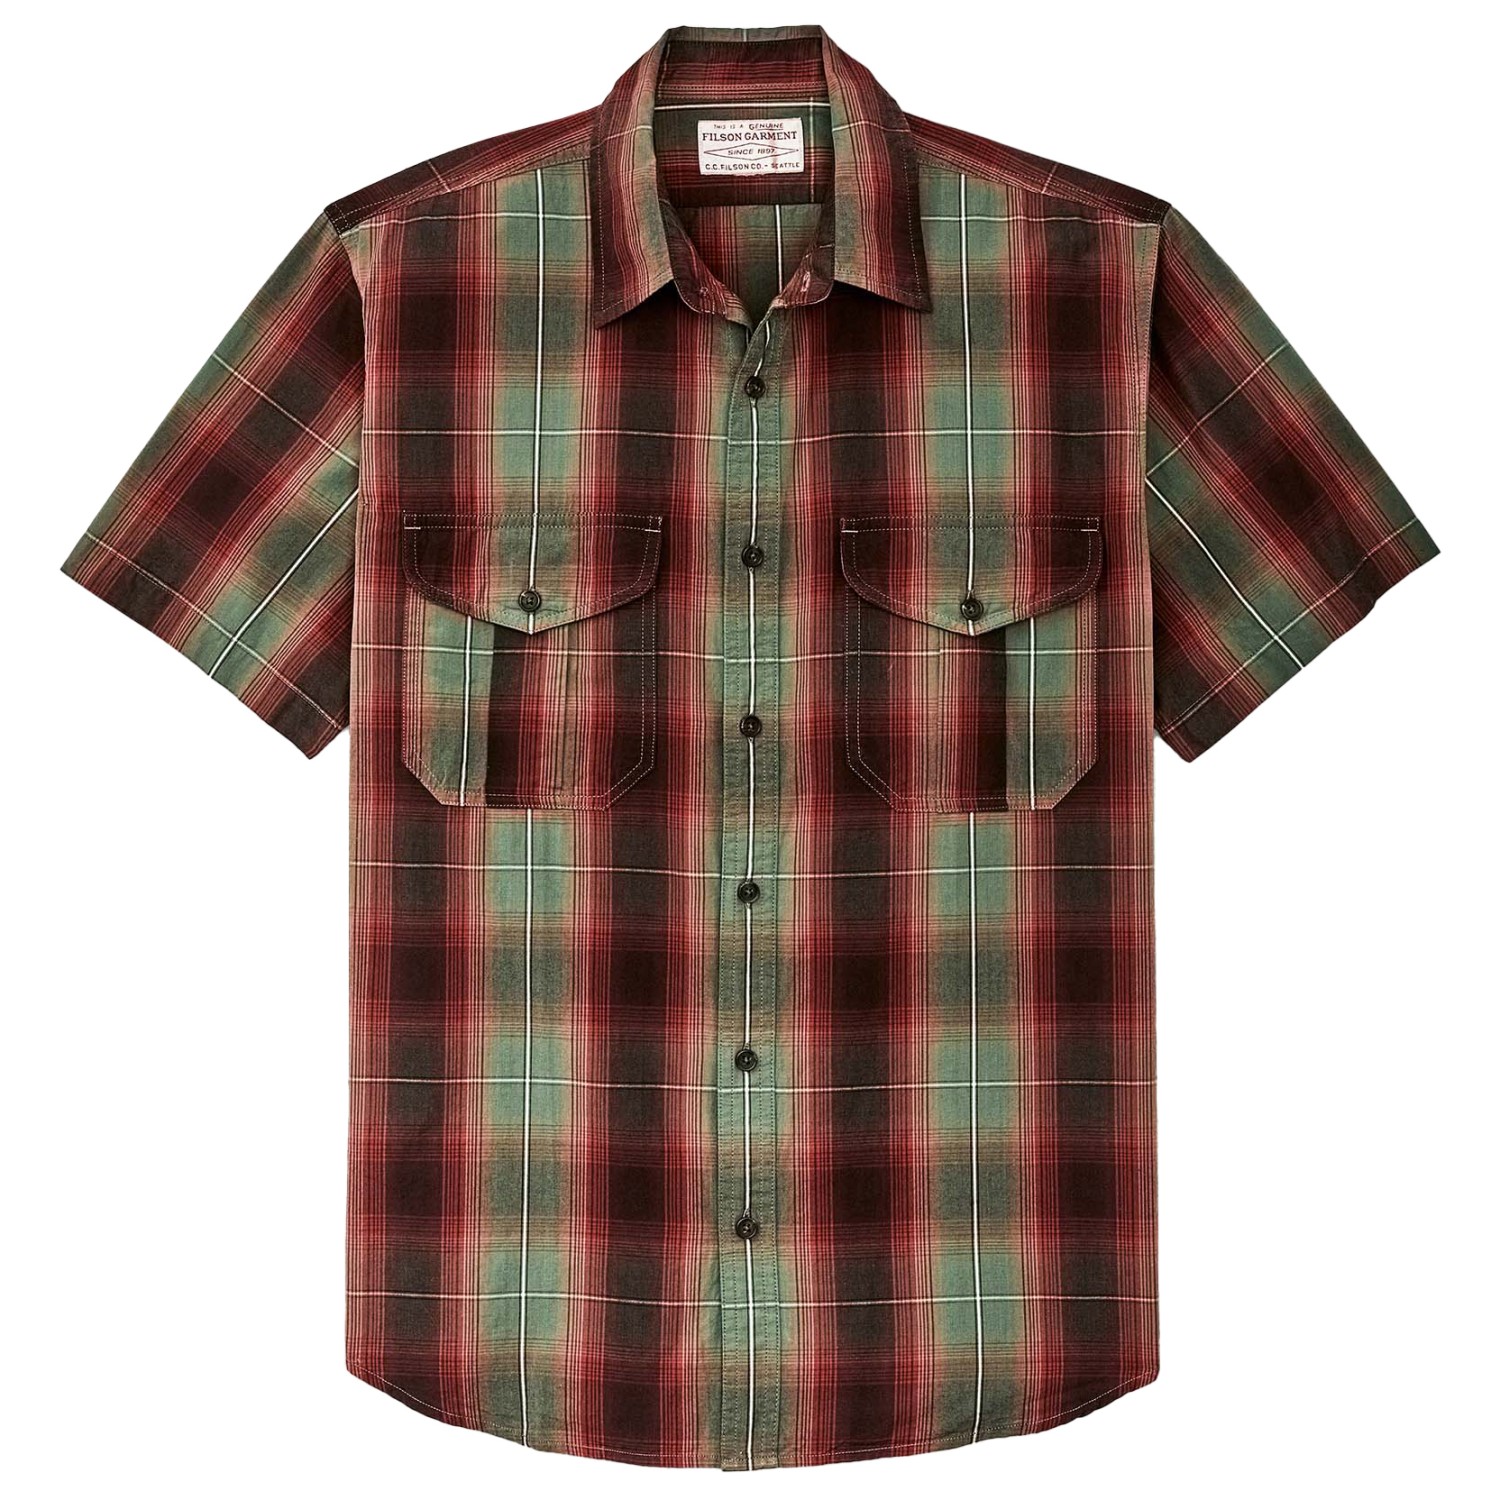 chizmar richard gwendy s magic feather Рубашка Filson Washed S/S Feather Cloth Shirt, цвет Green/Red/Black Ombre